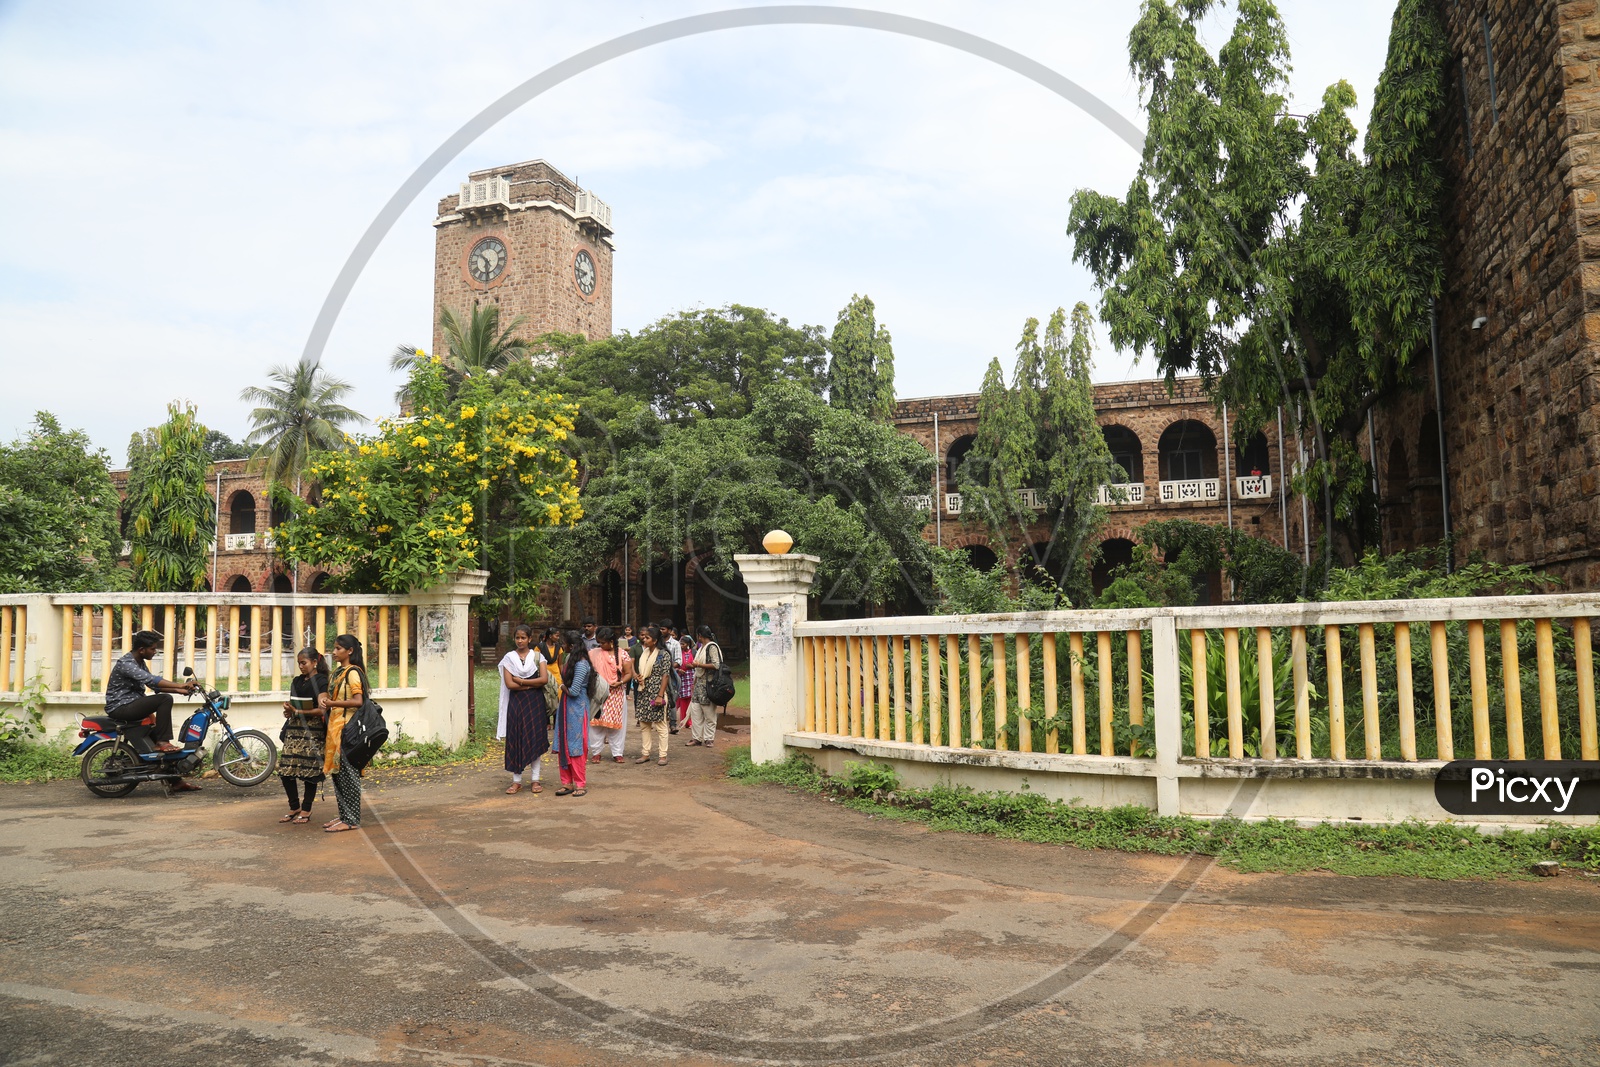 Students walking out of the entrance gate of the college